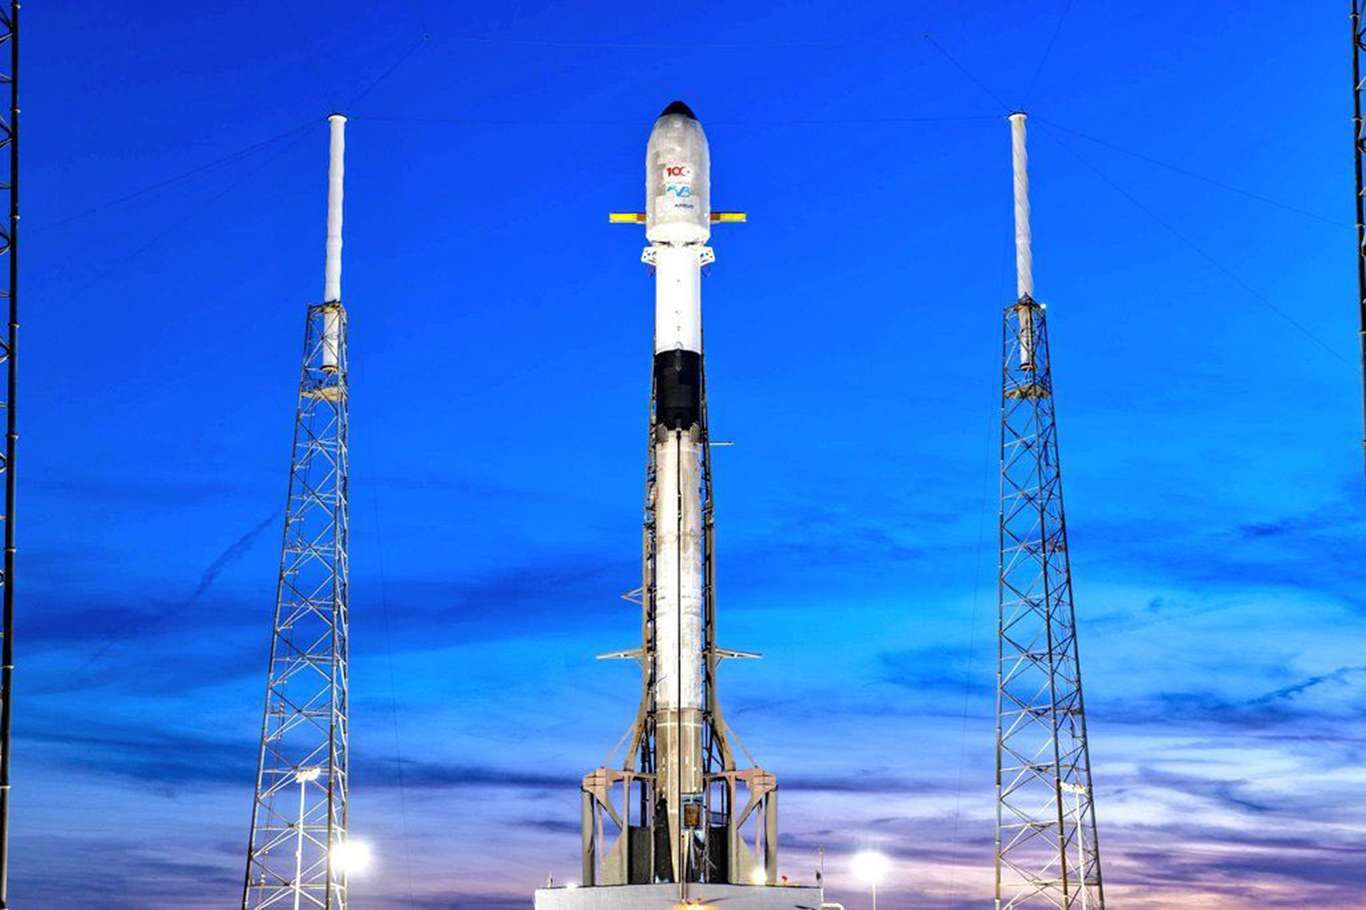 Türksat 5B launched with SpaceX Falcon 9 at Cape Canaveral, Florida